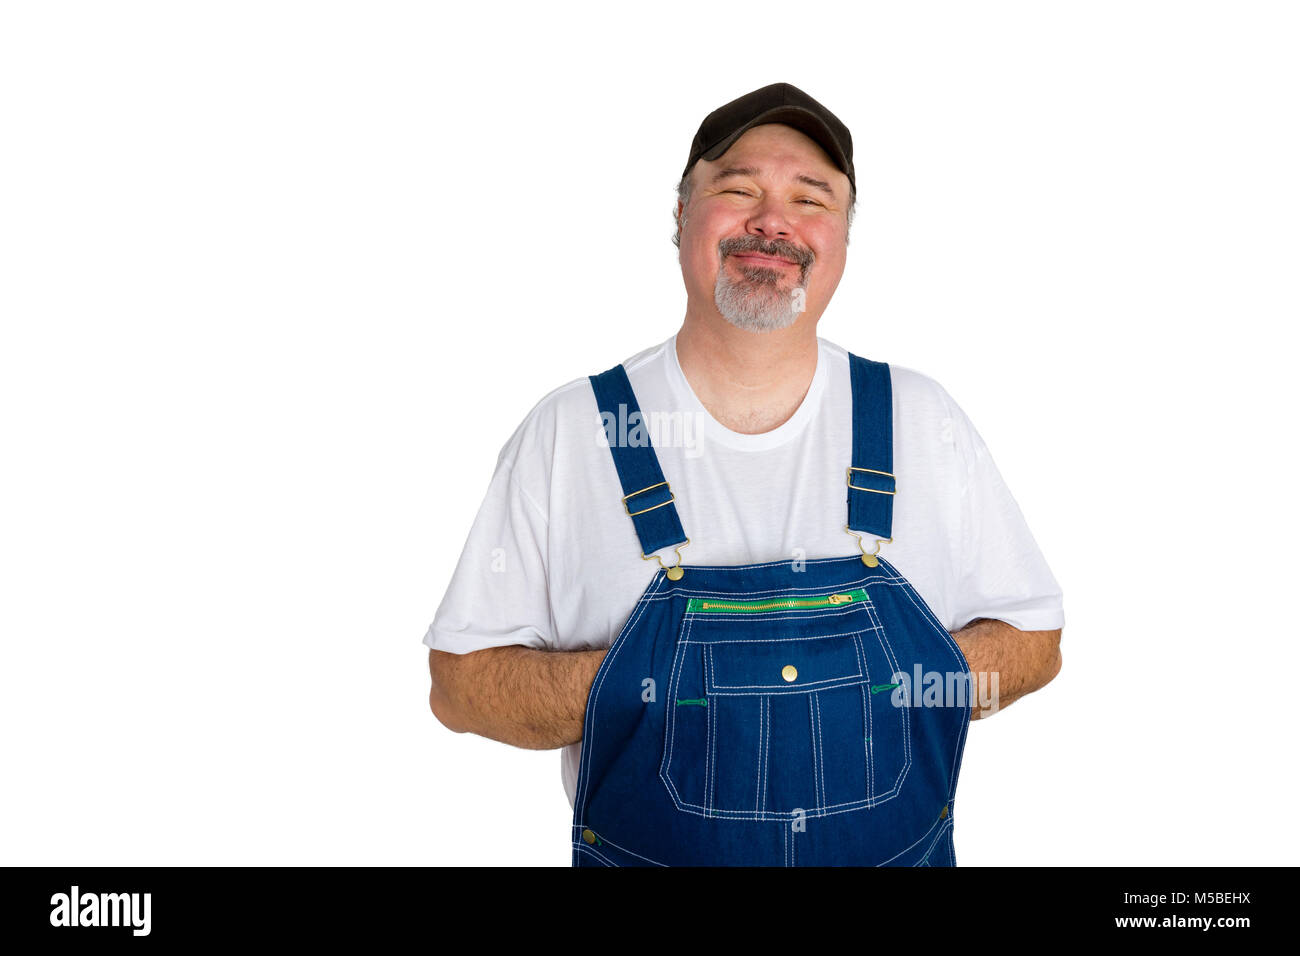 Portrait of cheerful man wearing dungarees against white background Stock Photo